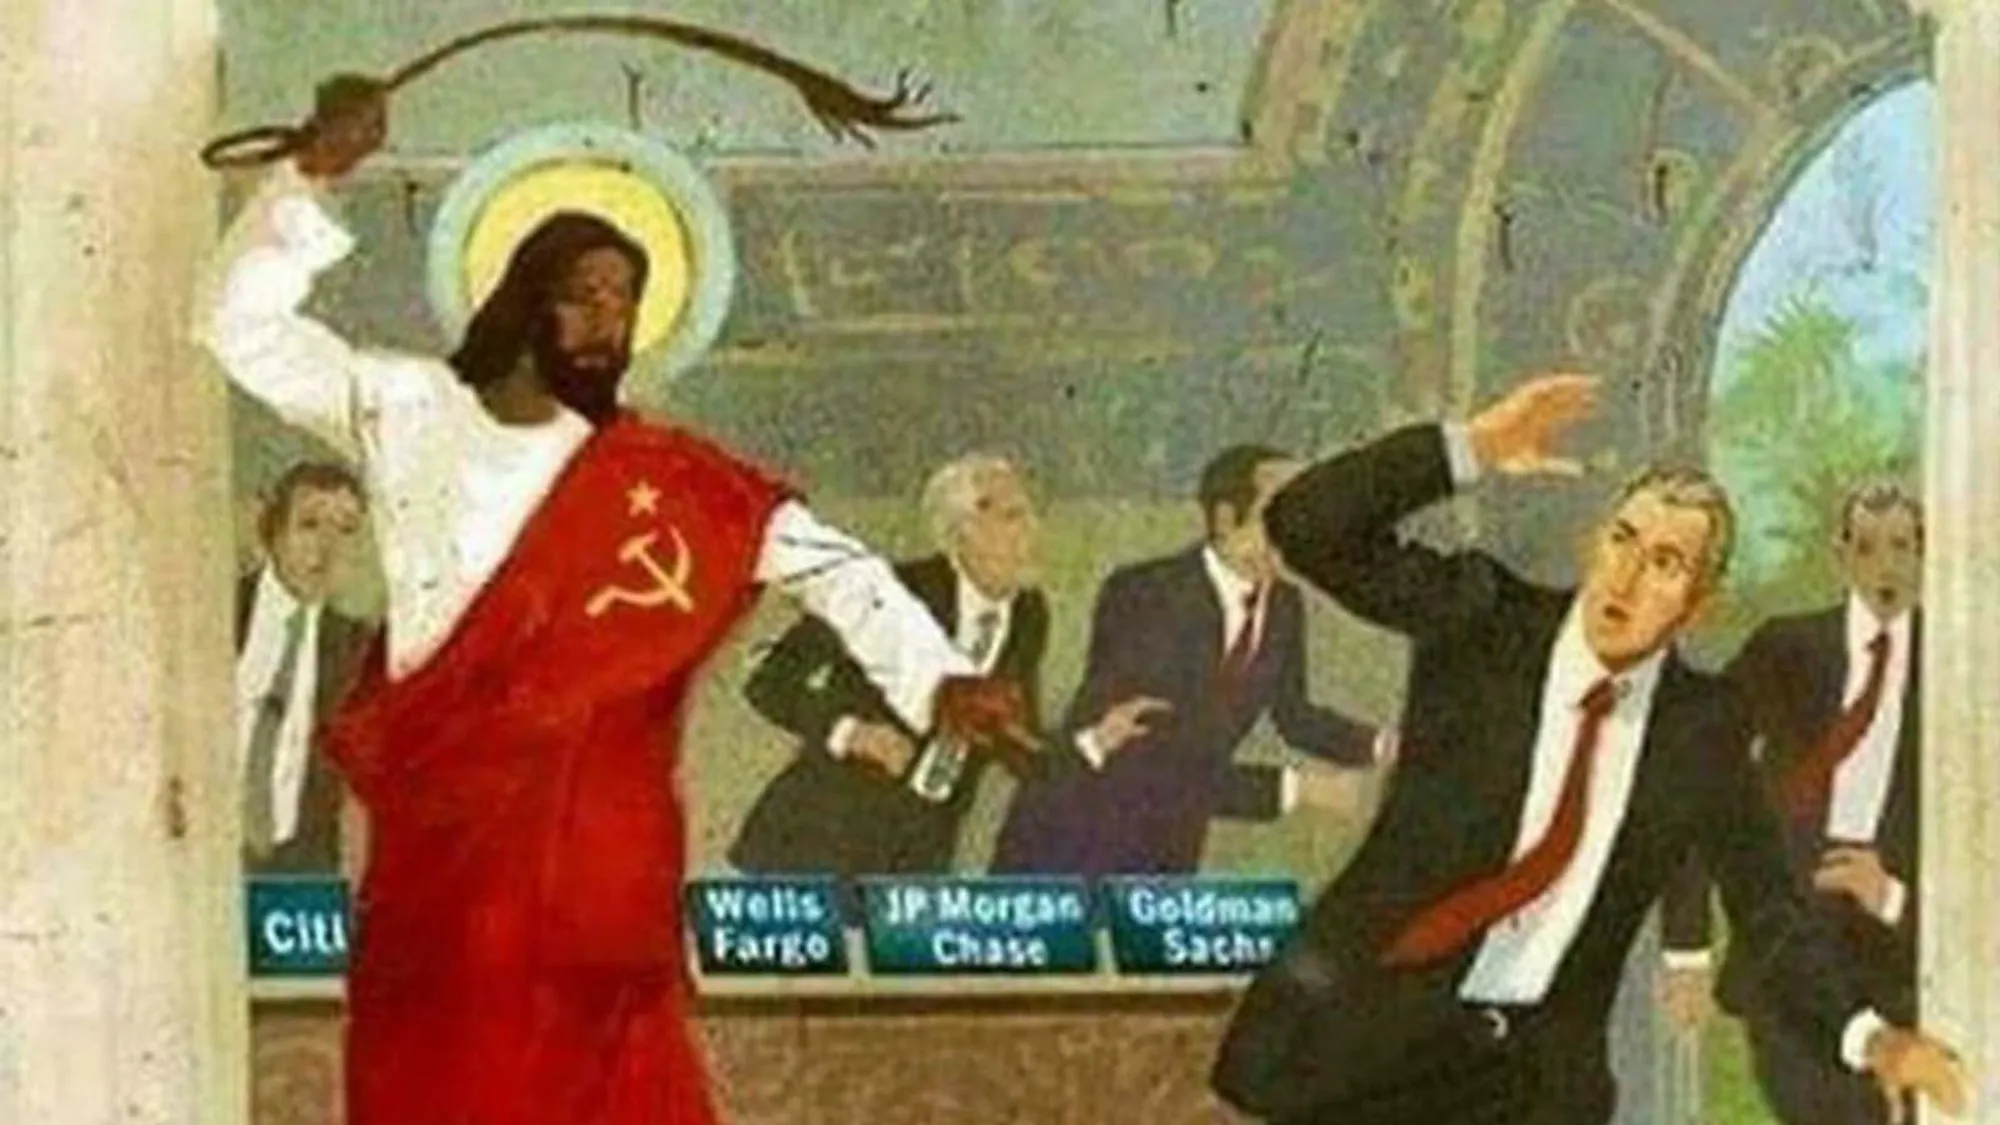 Communist Jesus driving idolatrous bankers out of the temple.